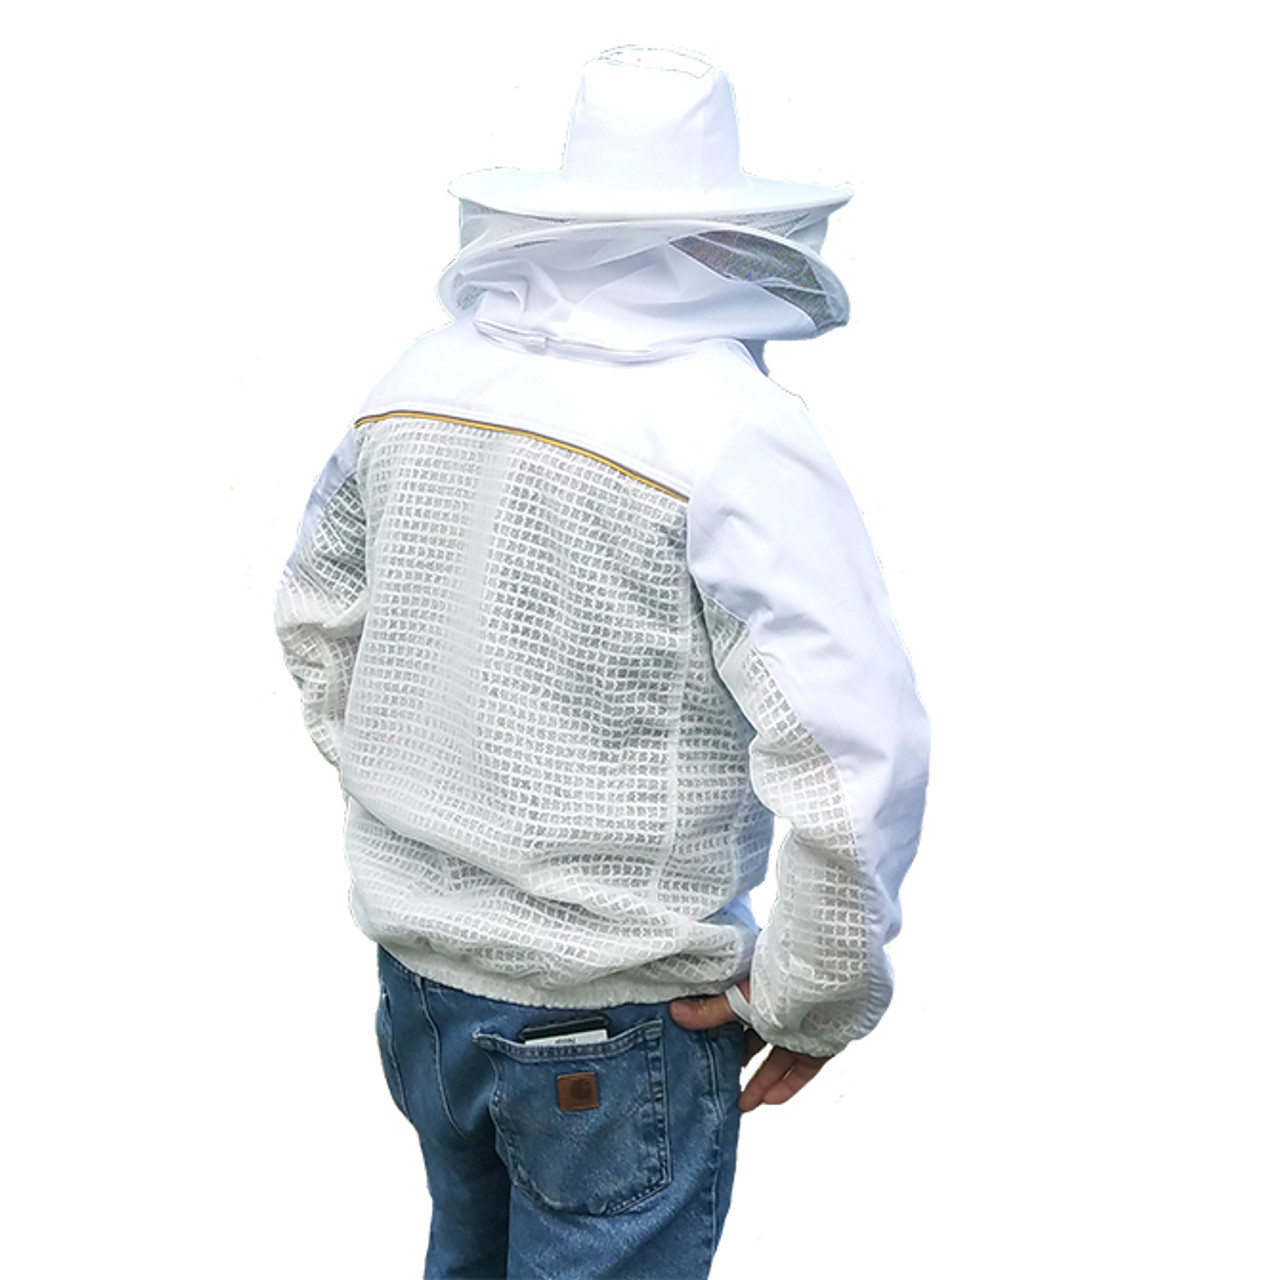 Lyson part vent jacket with vented back and underarm panels, back view showing vented panel from shoulders down and cotton/poly panel across top of arms and shoulders.